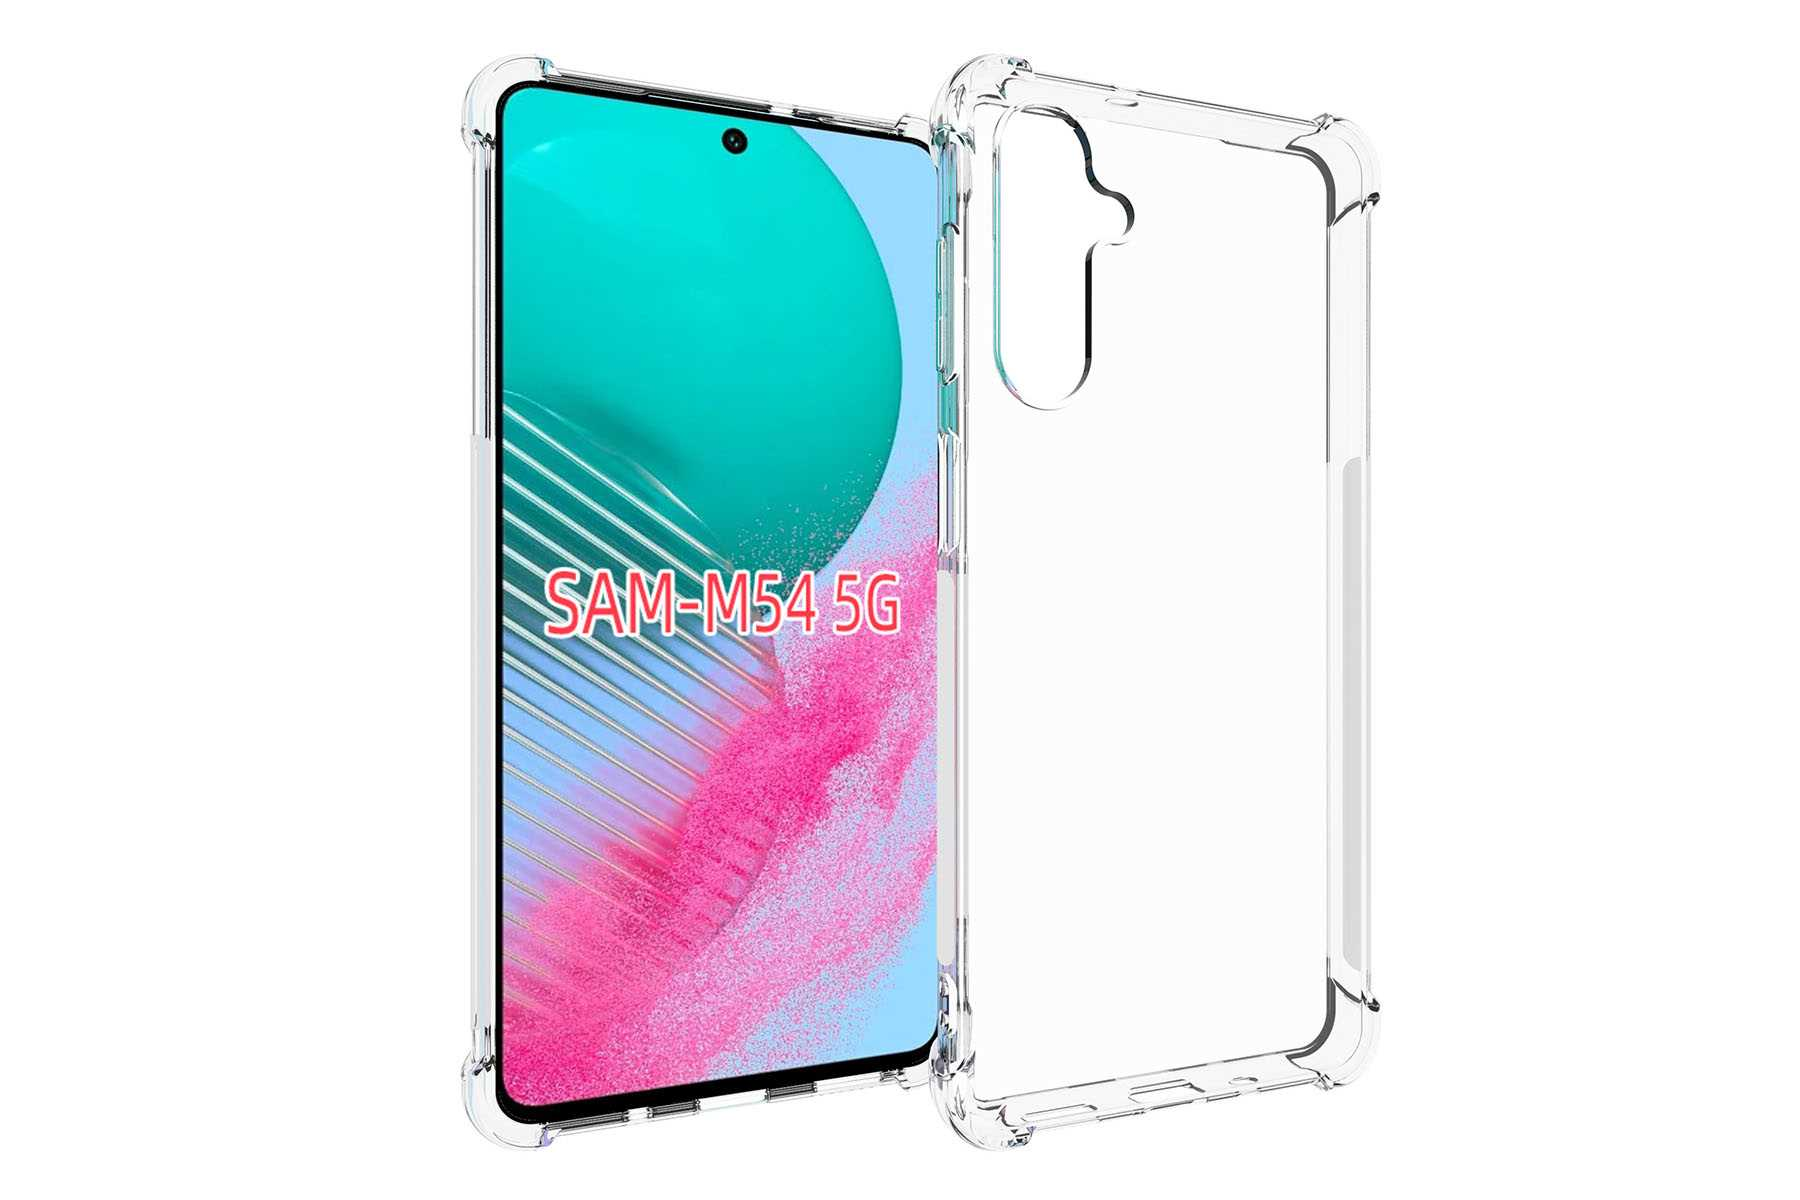 Backcover, Case, MTB MORE 5G, ENERGY Transparent Samsung, Armor Galaxy M54 Clear